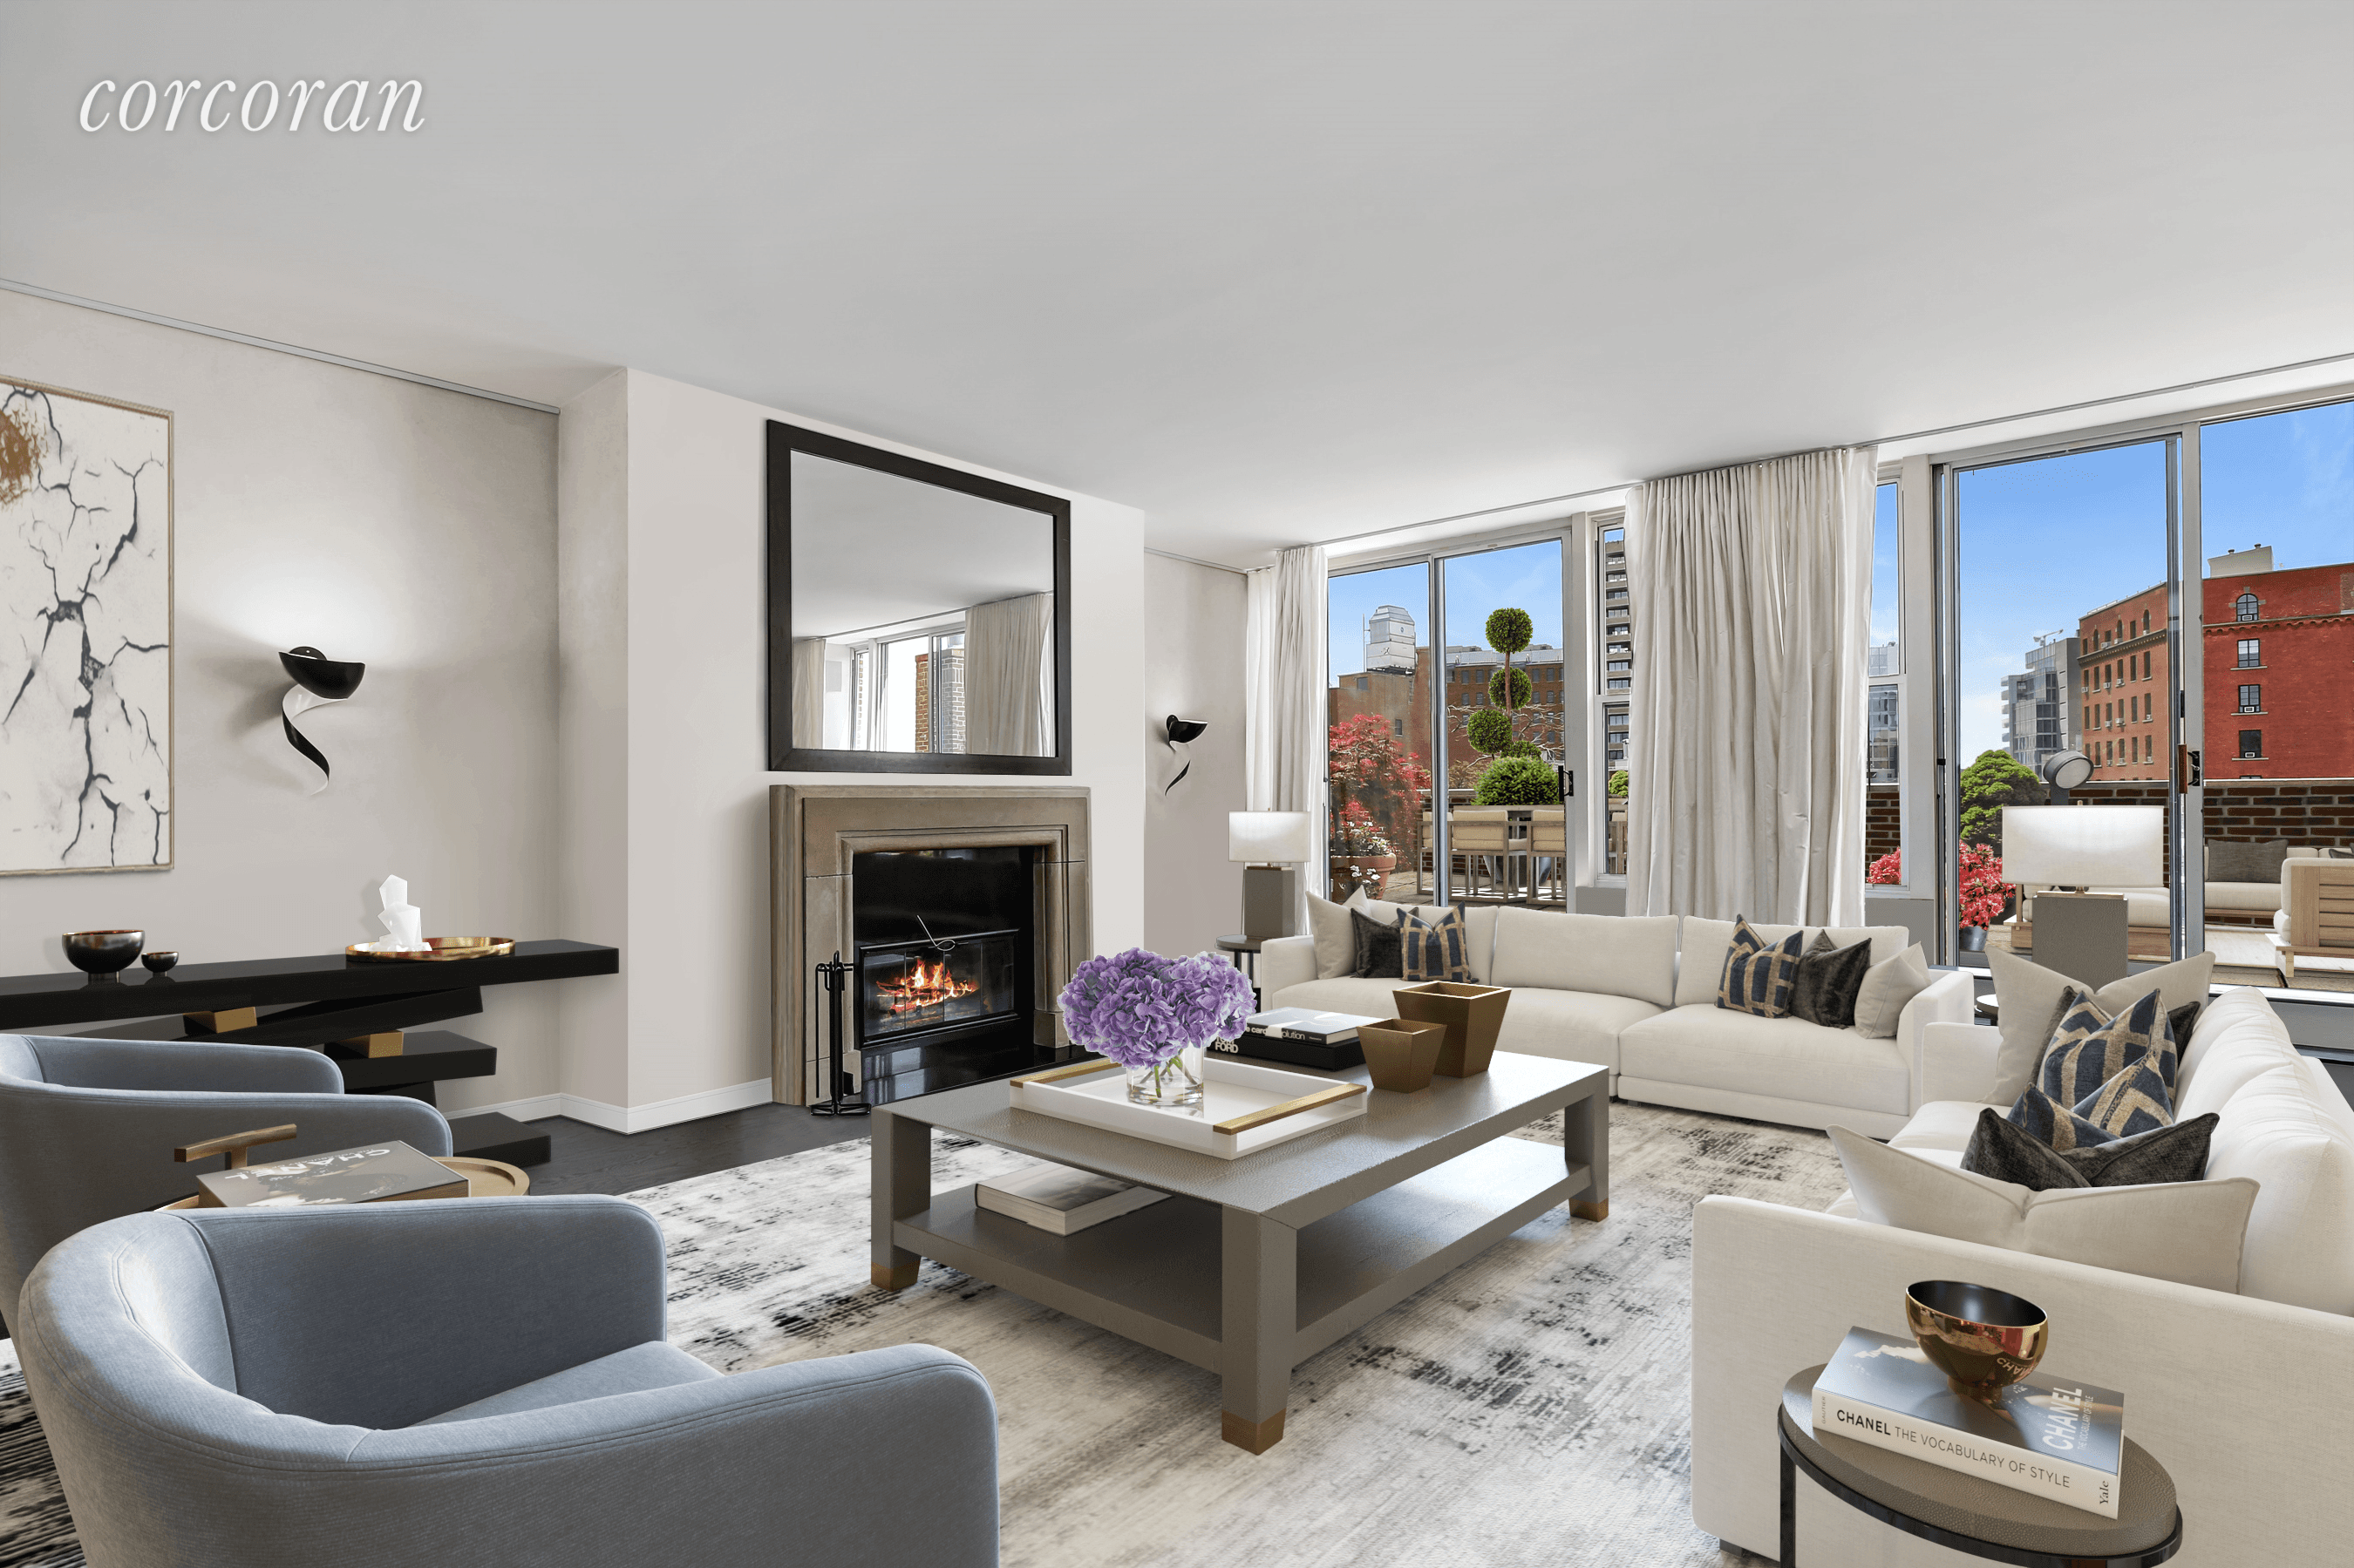 Available September 1st. This spectacular West Village penthouse loft features 3, 665 SF of combined indoor outdoor living space perfect for entertaining or enjoying time outdoors on the heart of ...